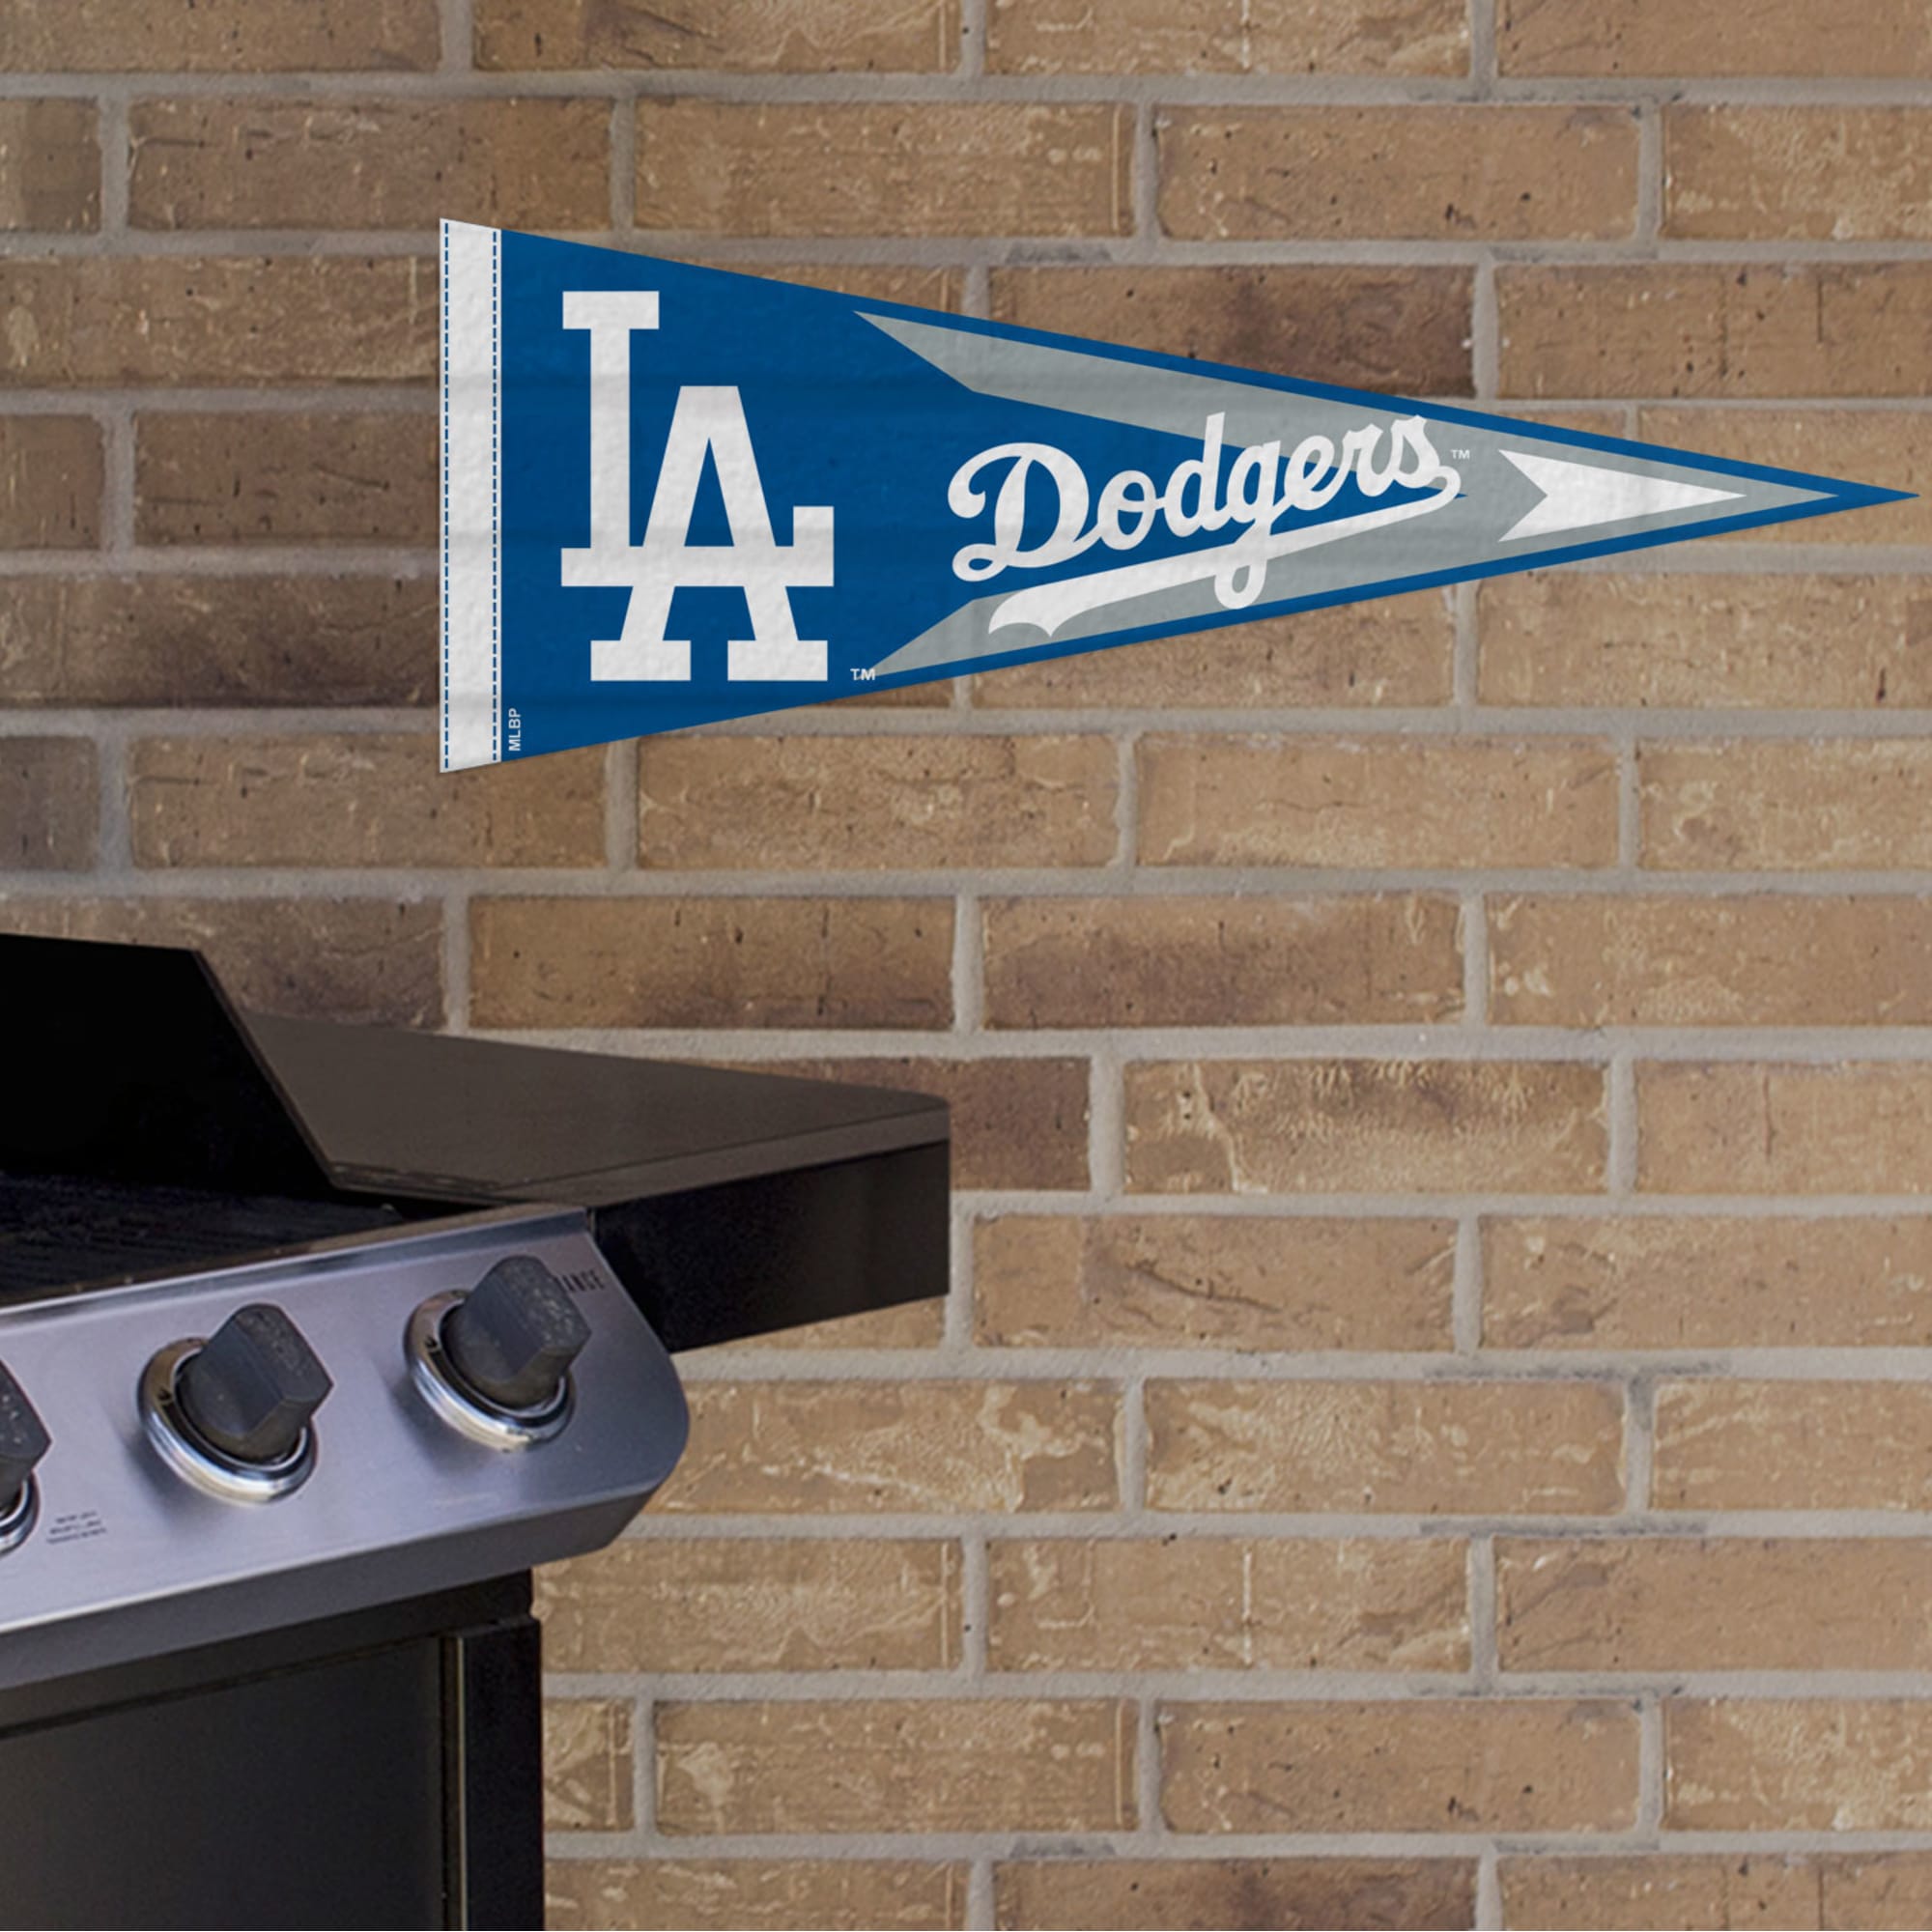 Los Angeles Dodgers: Pennant - Officially Licensed MLB Outdoor Graphic 24.0"W x 9.0"H by Fathead | Wood/Aluminum